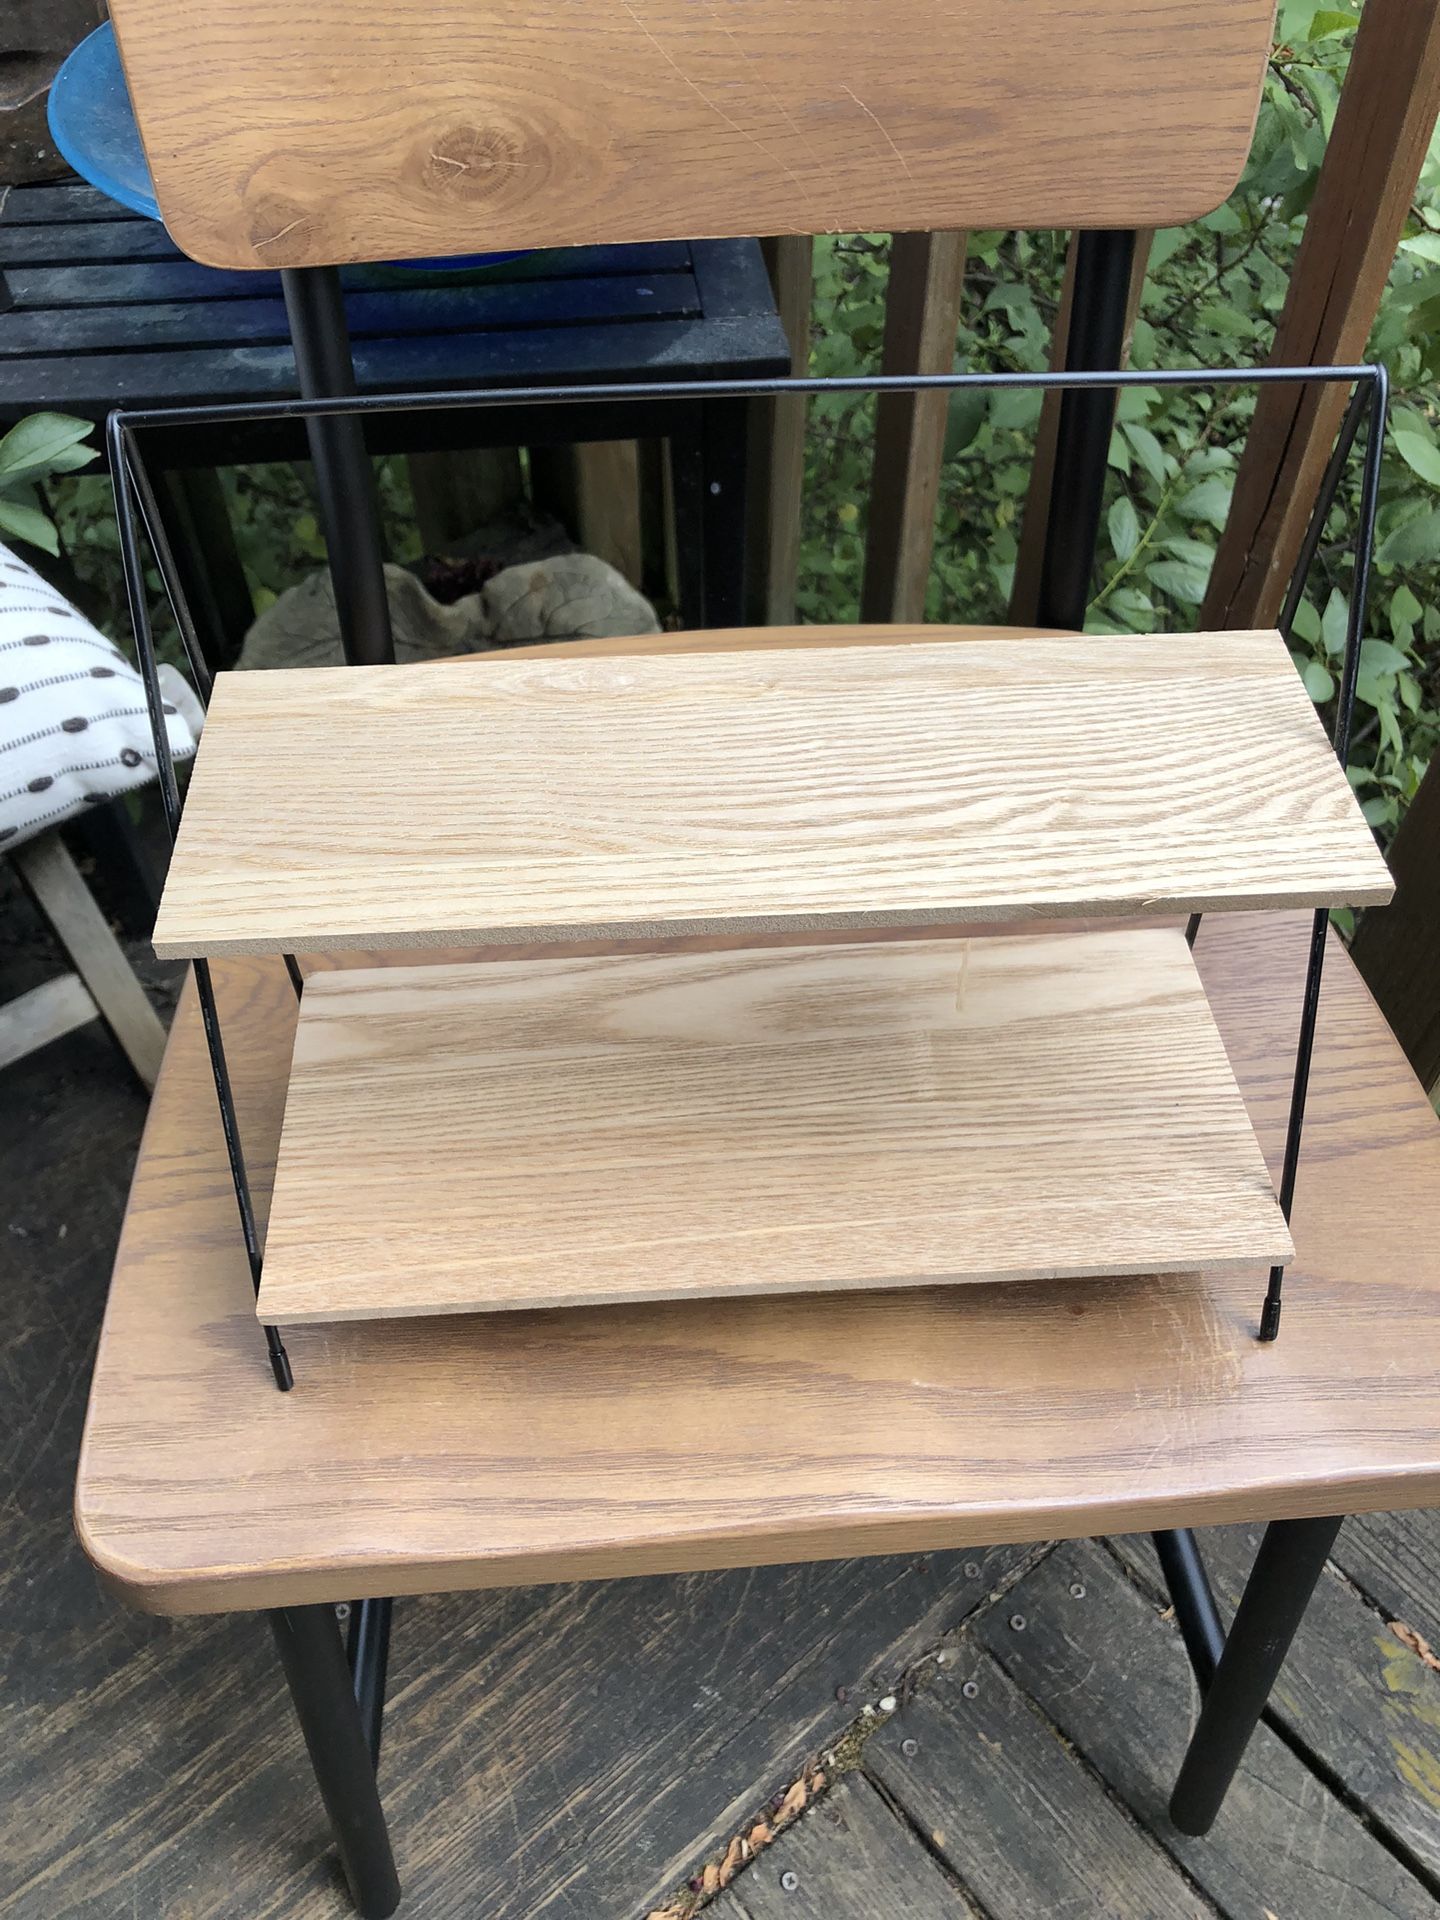 Small Shelf/ Read Description And Look At The Pictures 